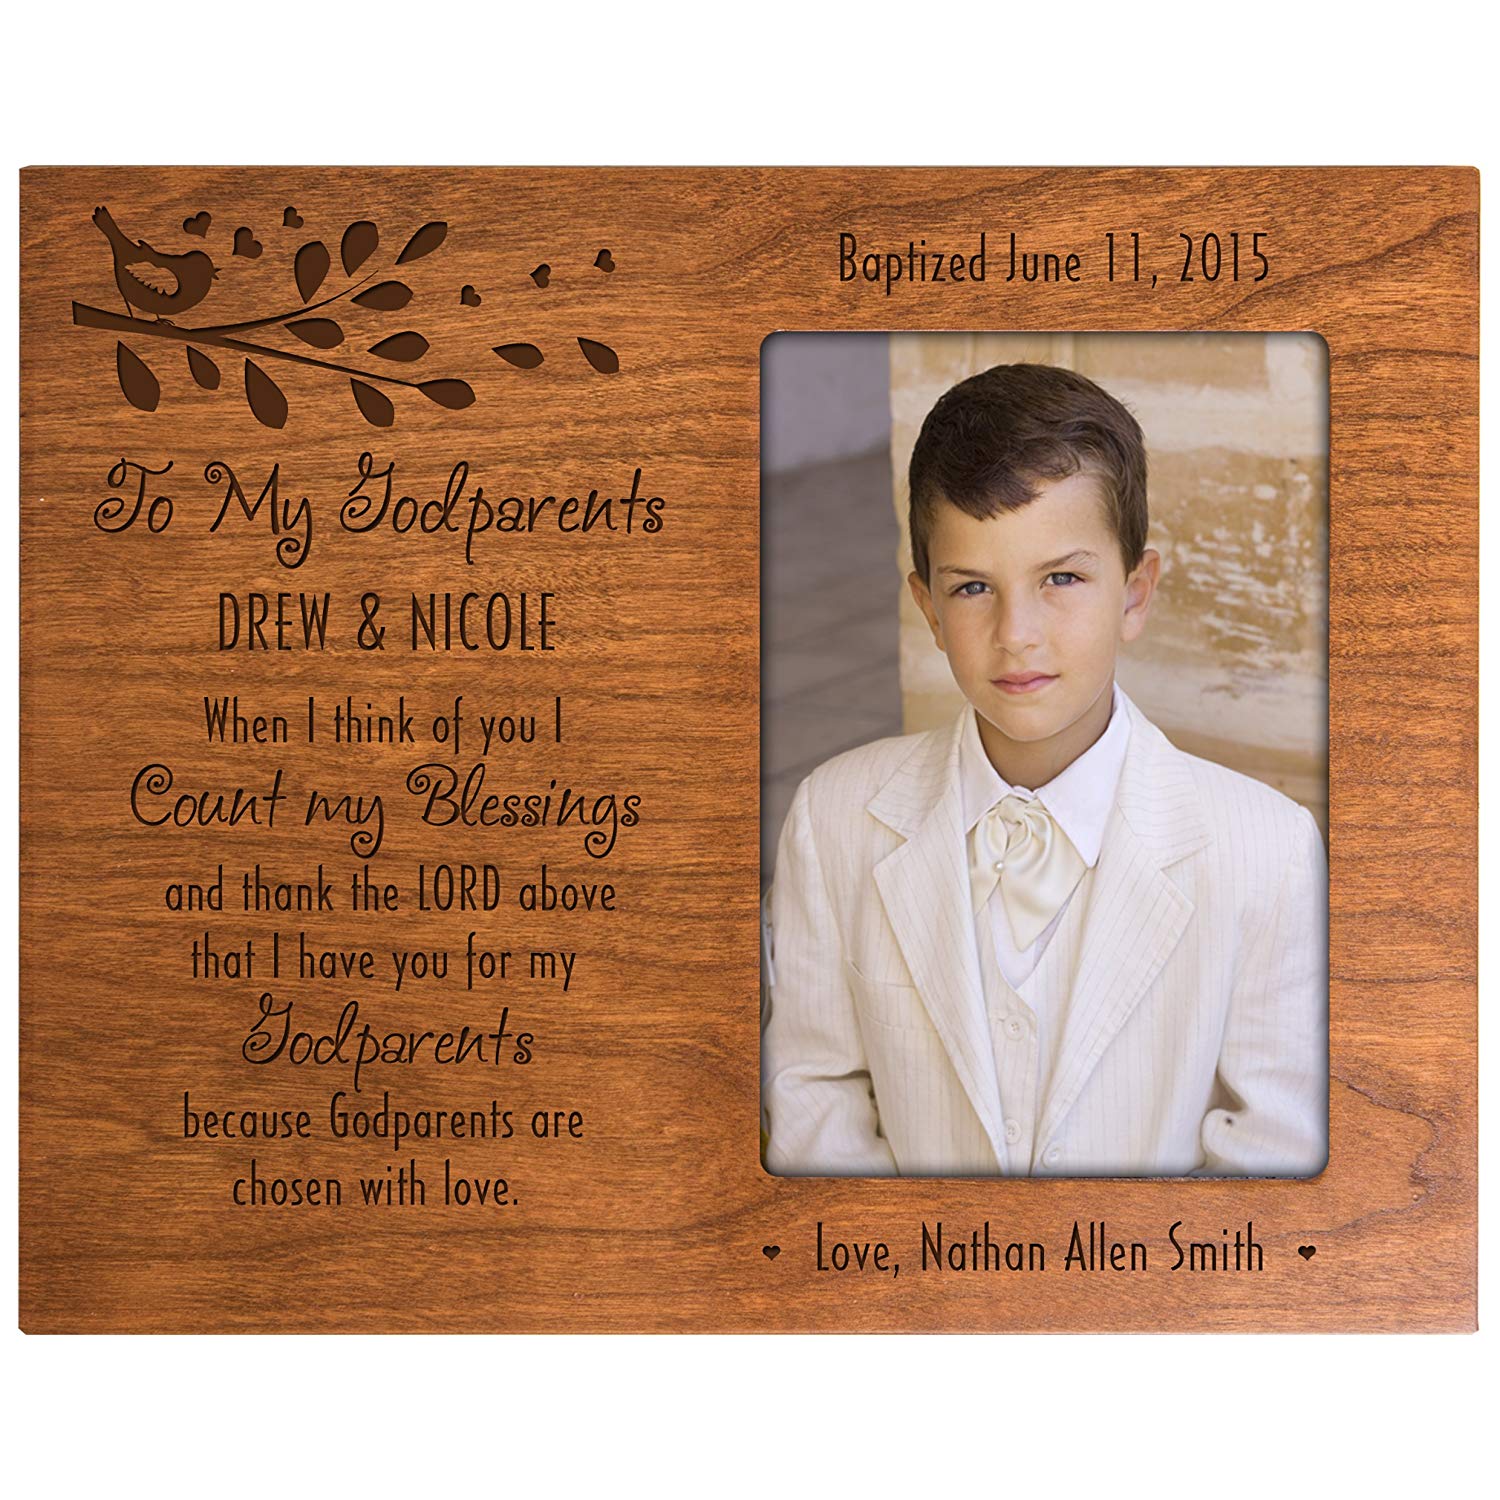 Personalized Baptism Photo Frame Gift "Count My Blessings" - LifeSong Milestones